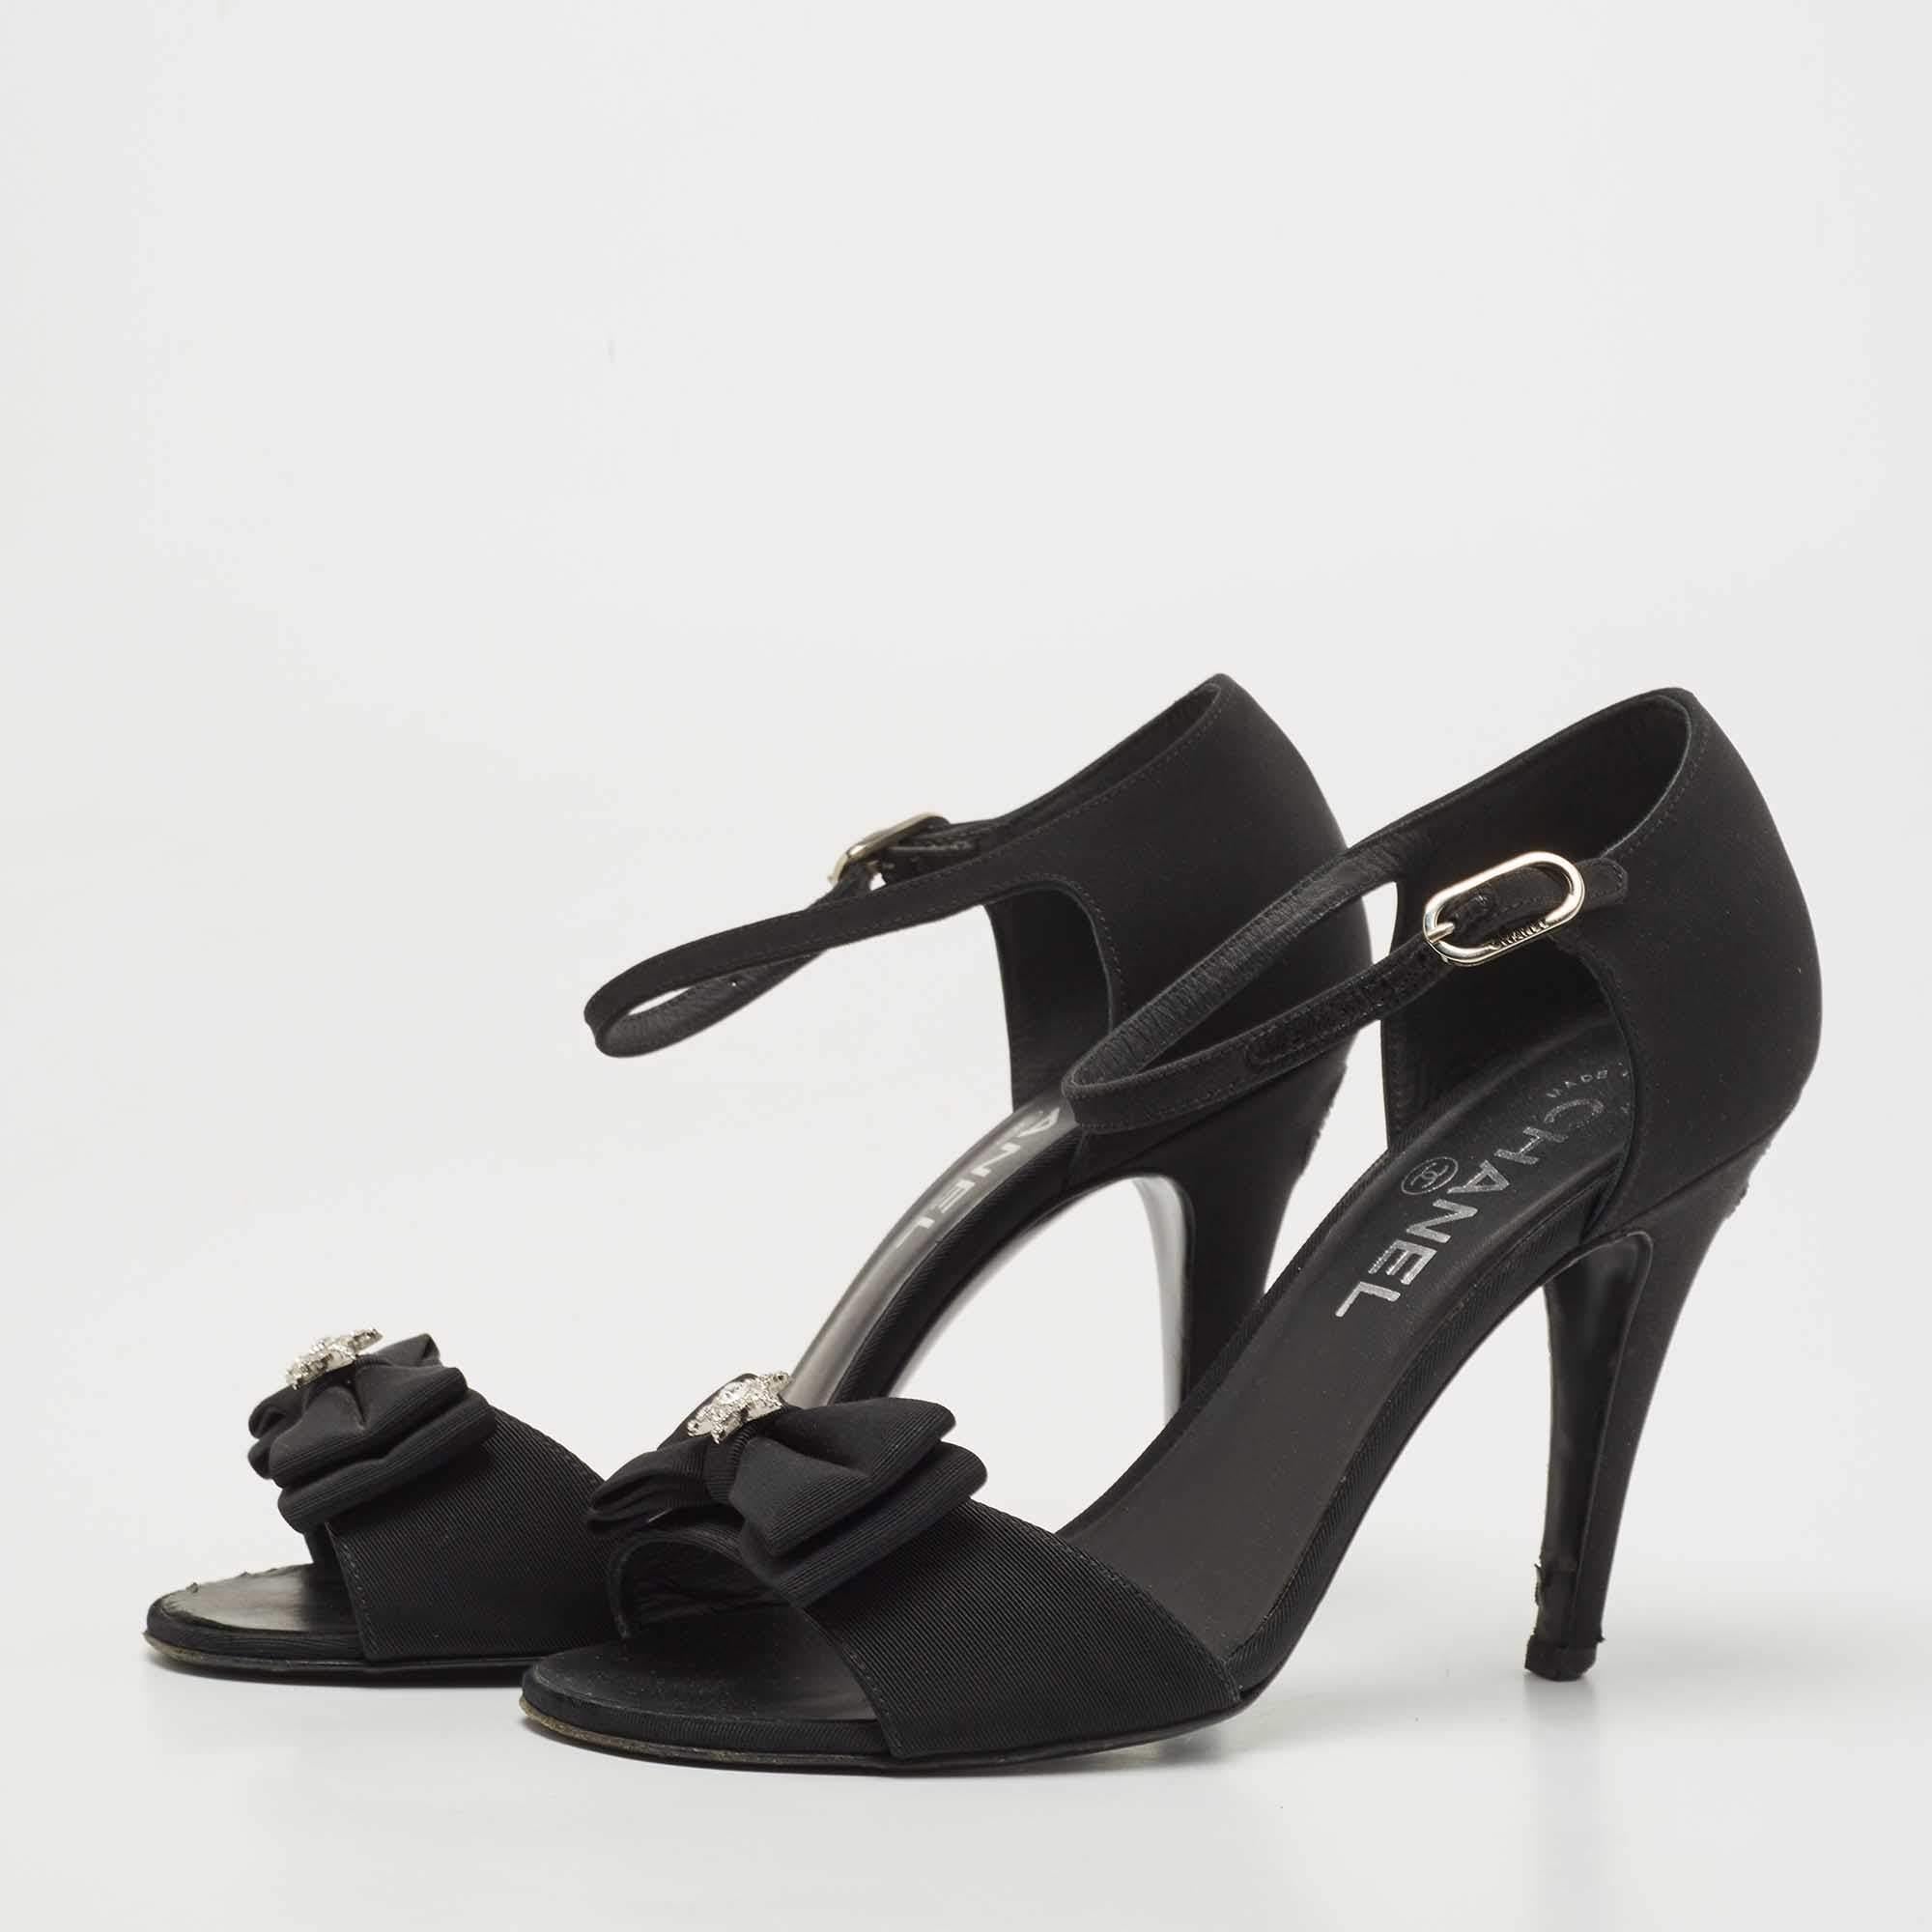 This classy pair of sandals from Chanel looks even better on the feet. The shoes have a fabric exterior added with bows, simple buckle closures, and open toes. They are lifted on 10 cm heels.

